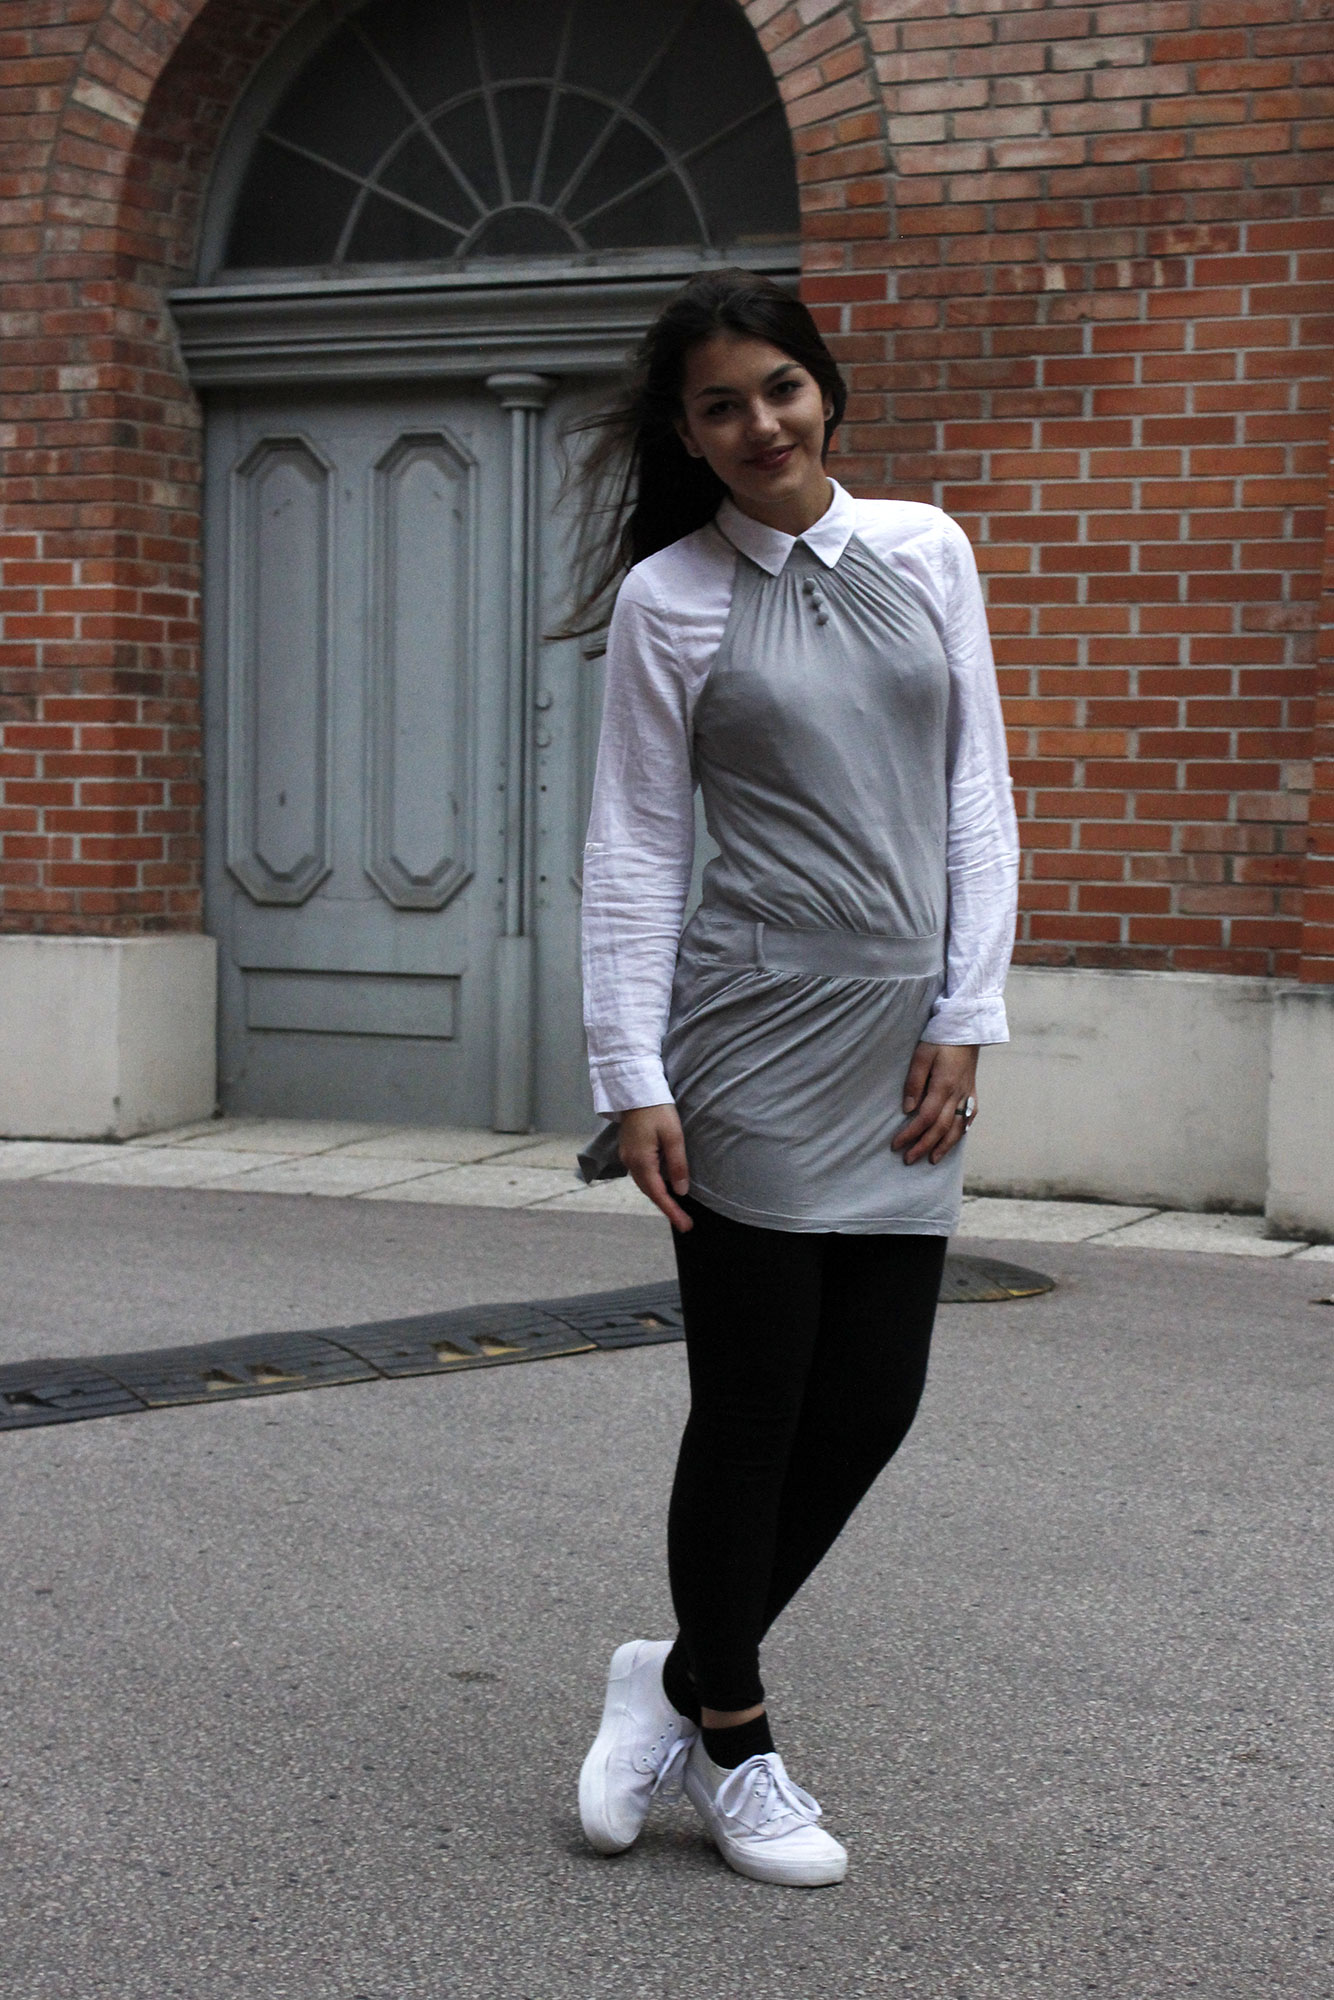 Dorie wearing a grey dress and a white blouse with black legging and white shoes